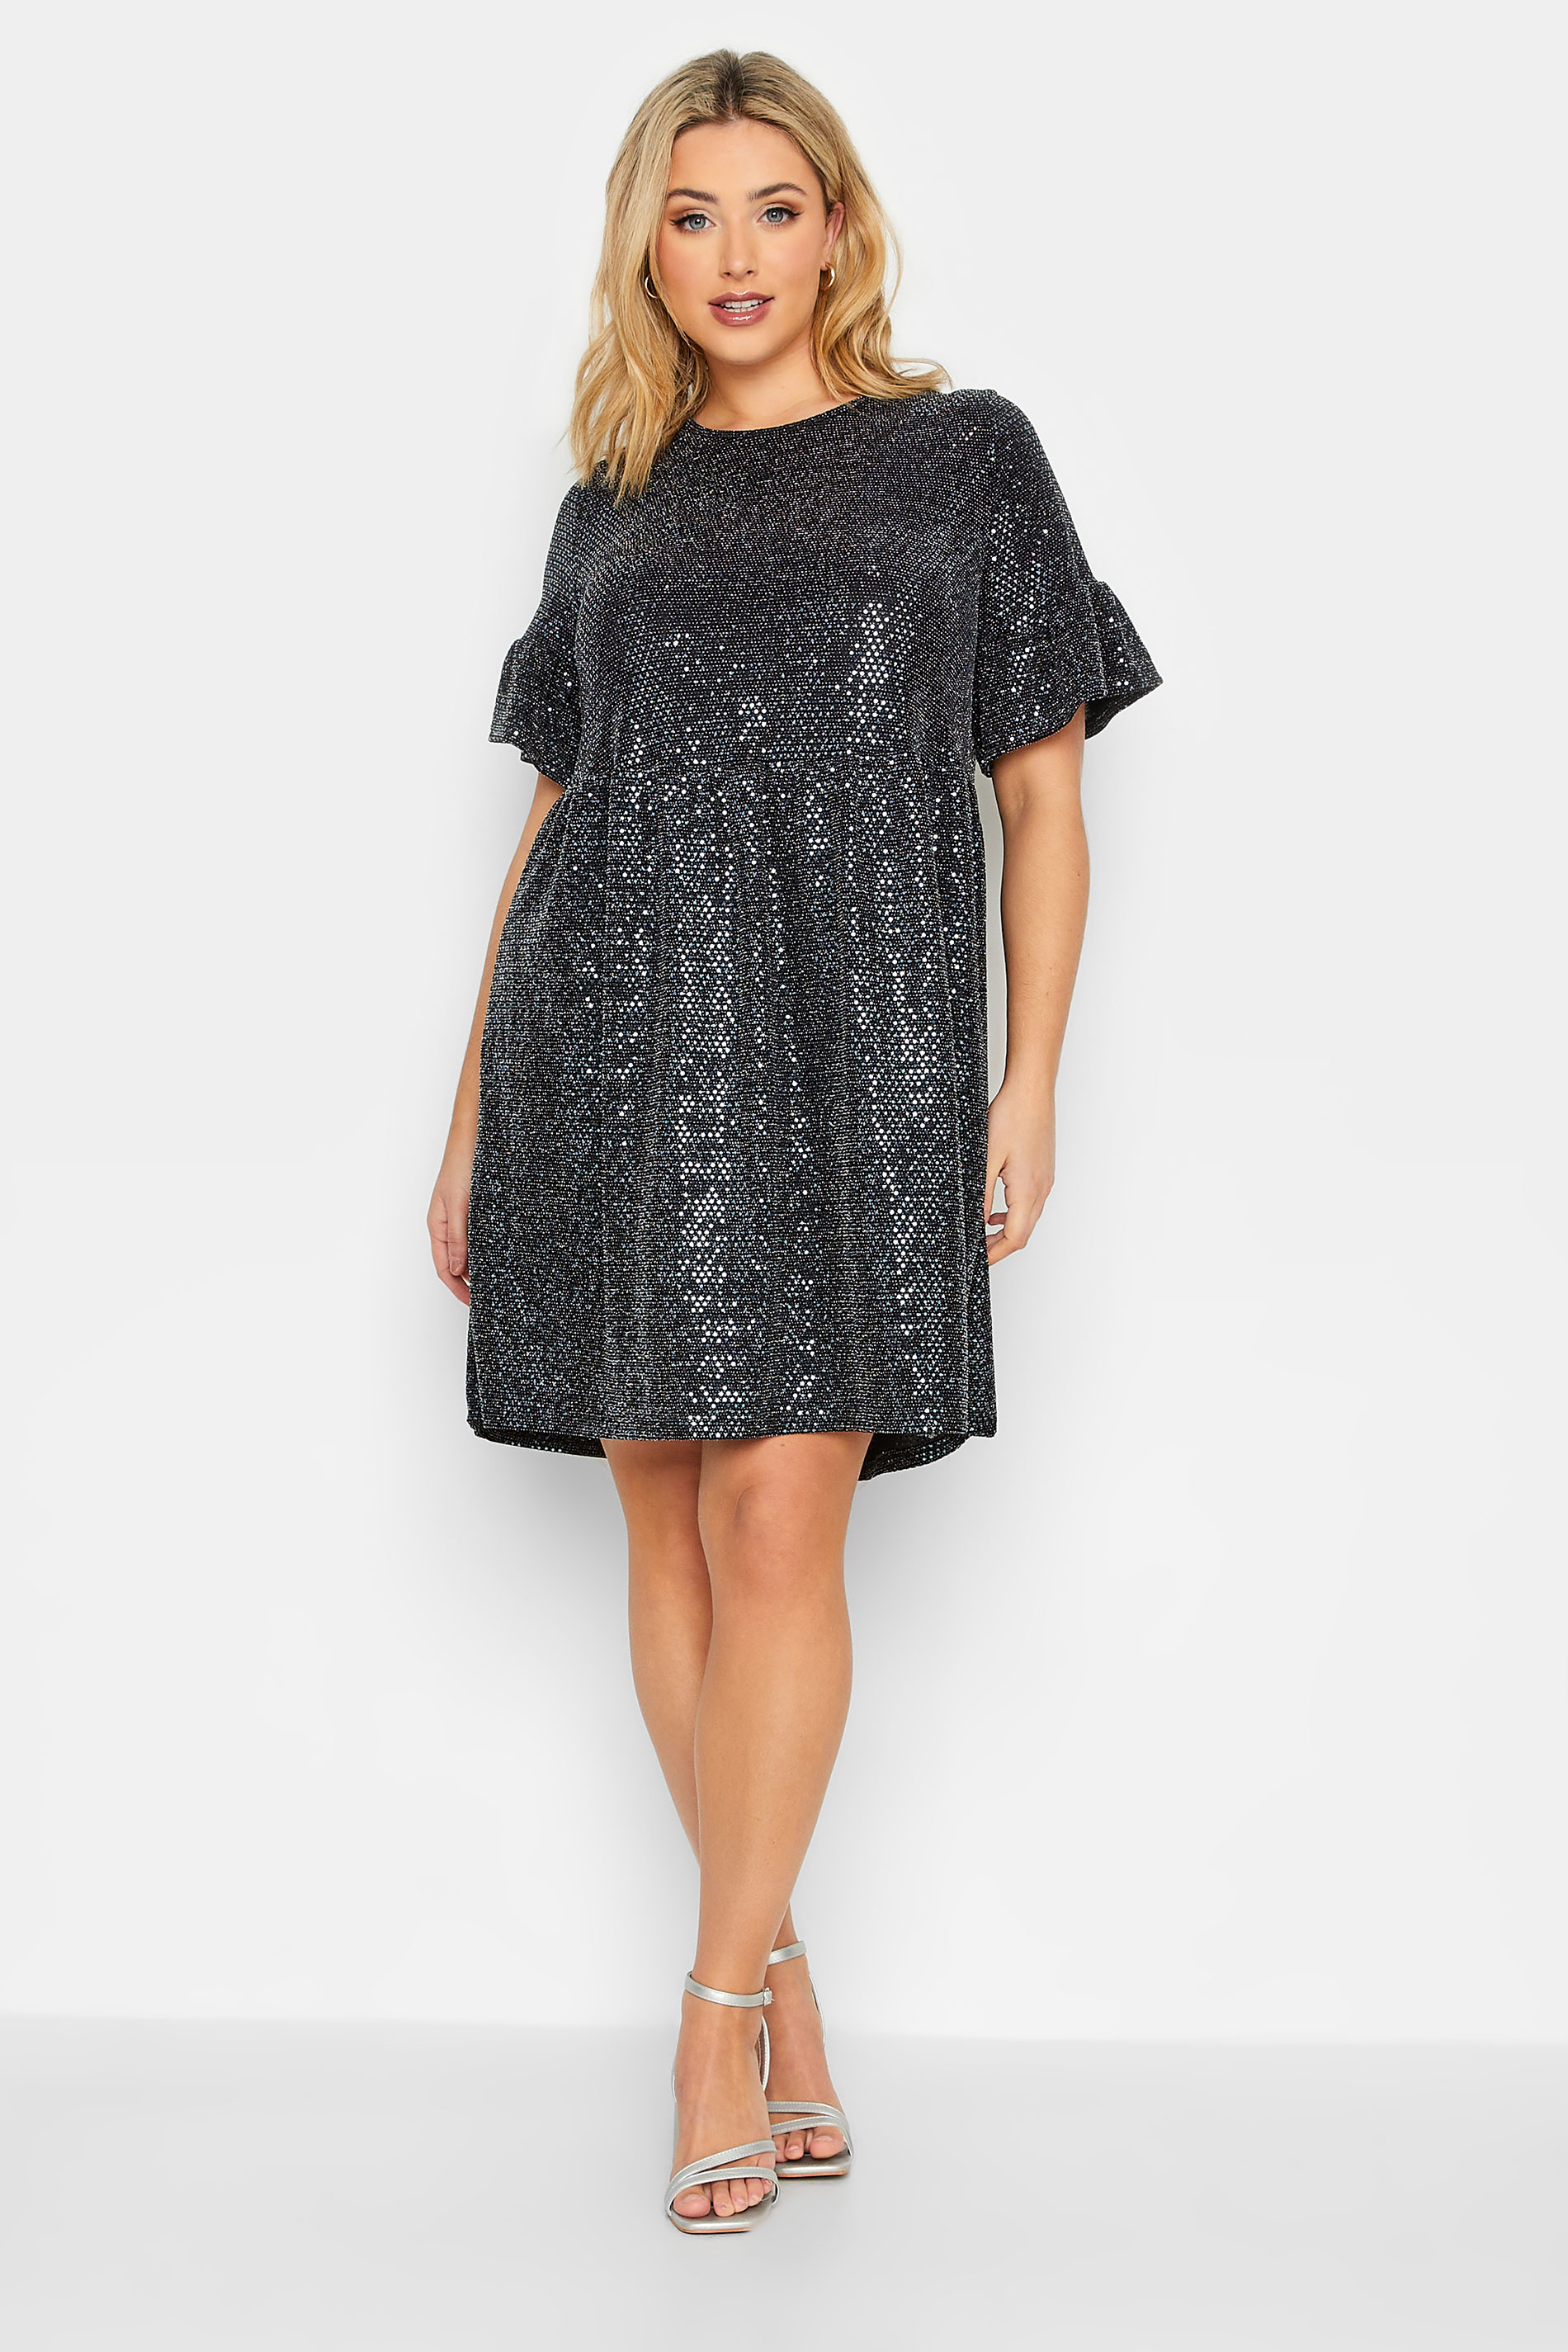 Plus Size Black & Silver Sequin Smock Dress | Yours Clothing 1